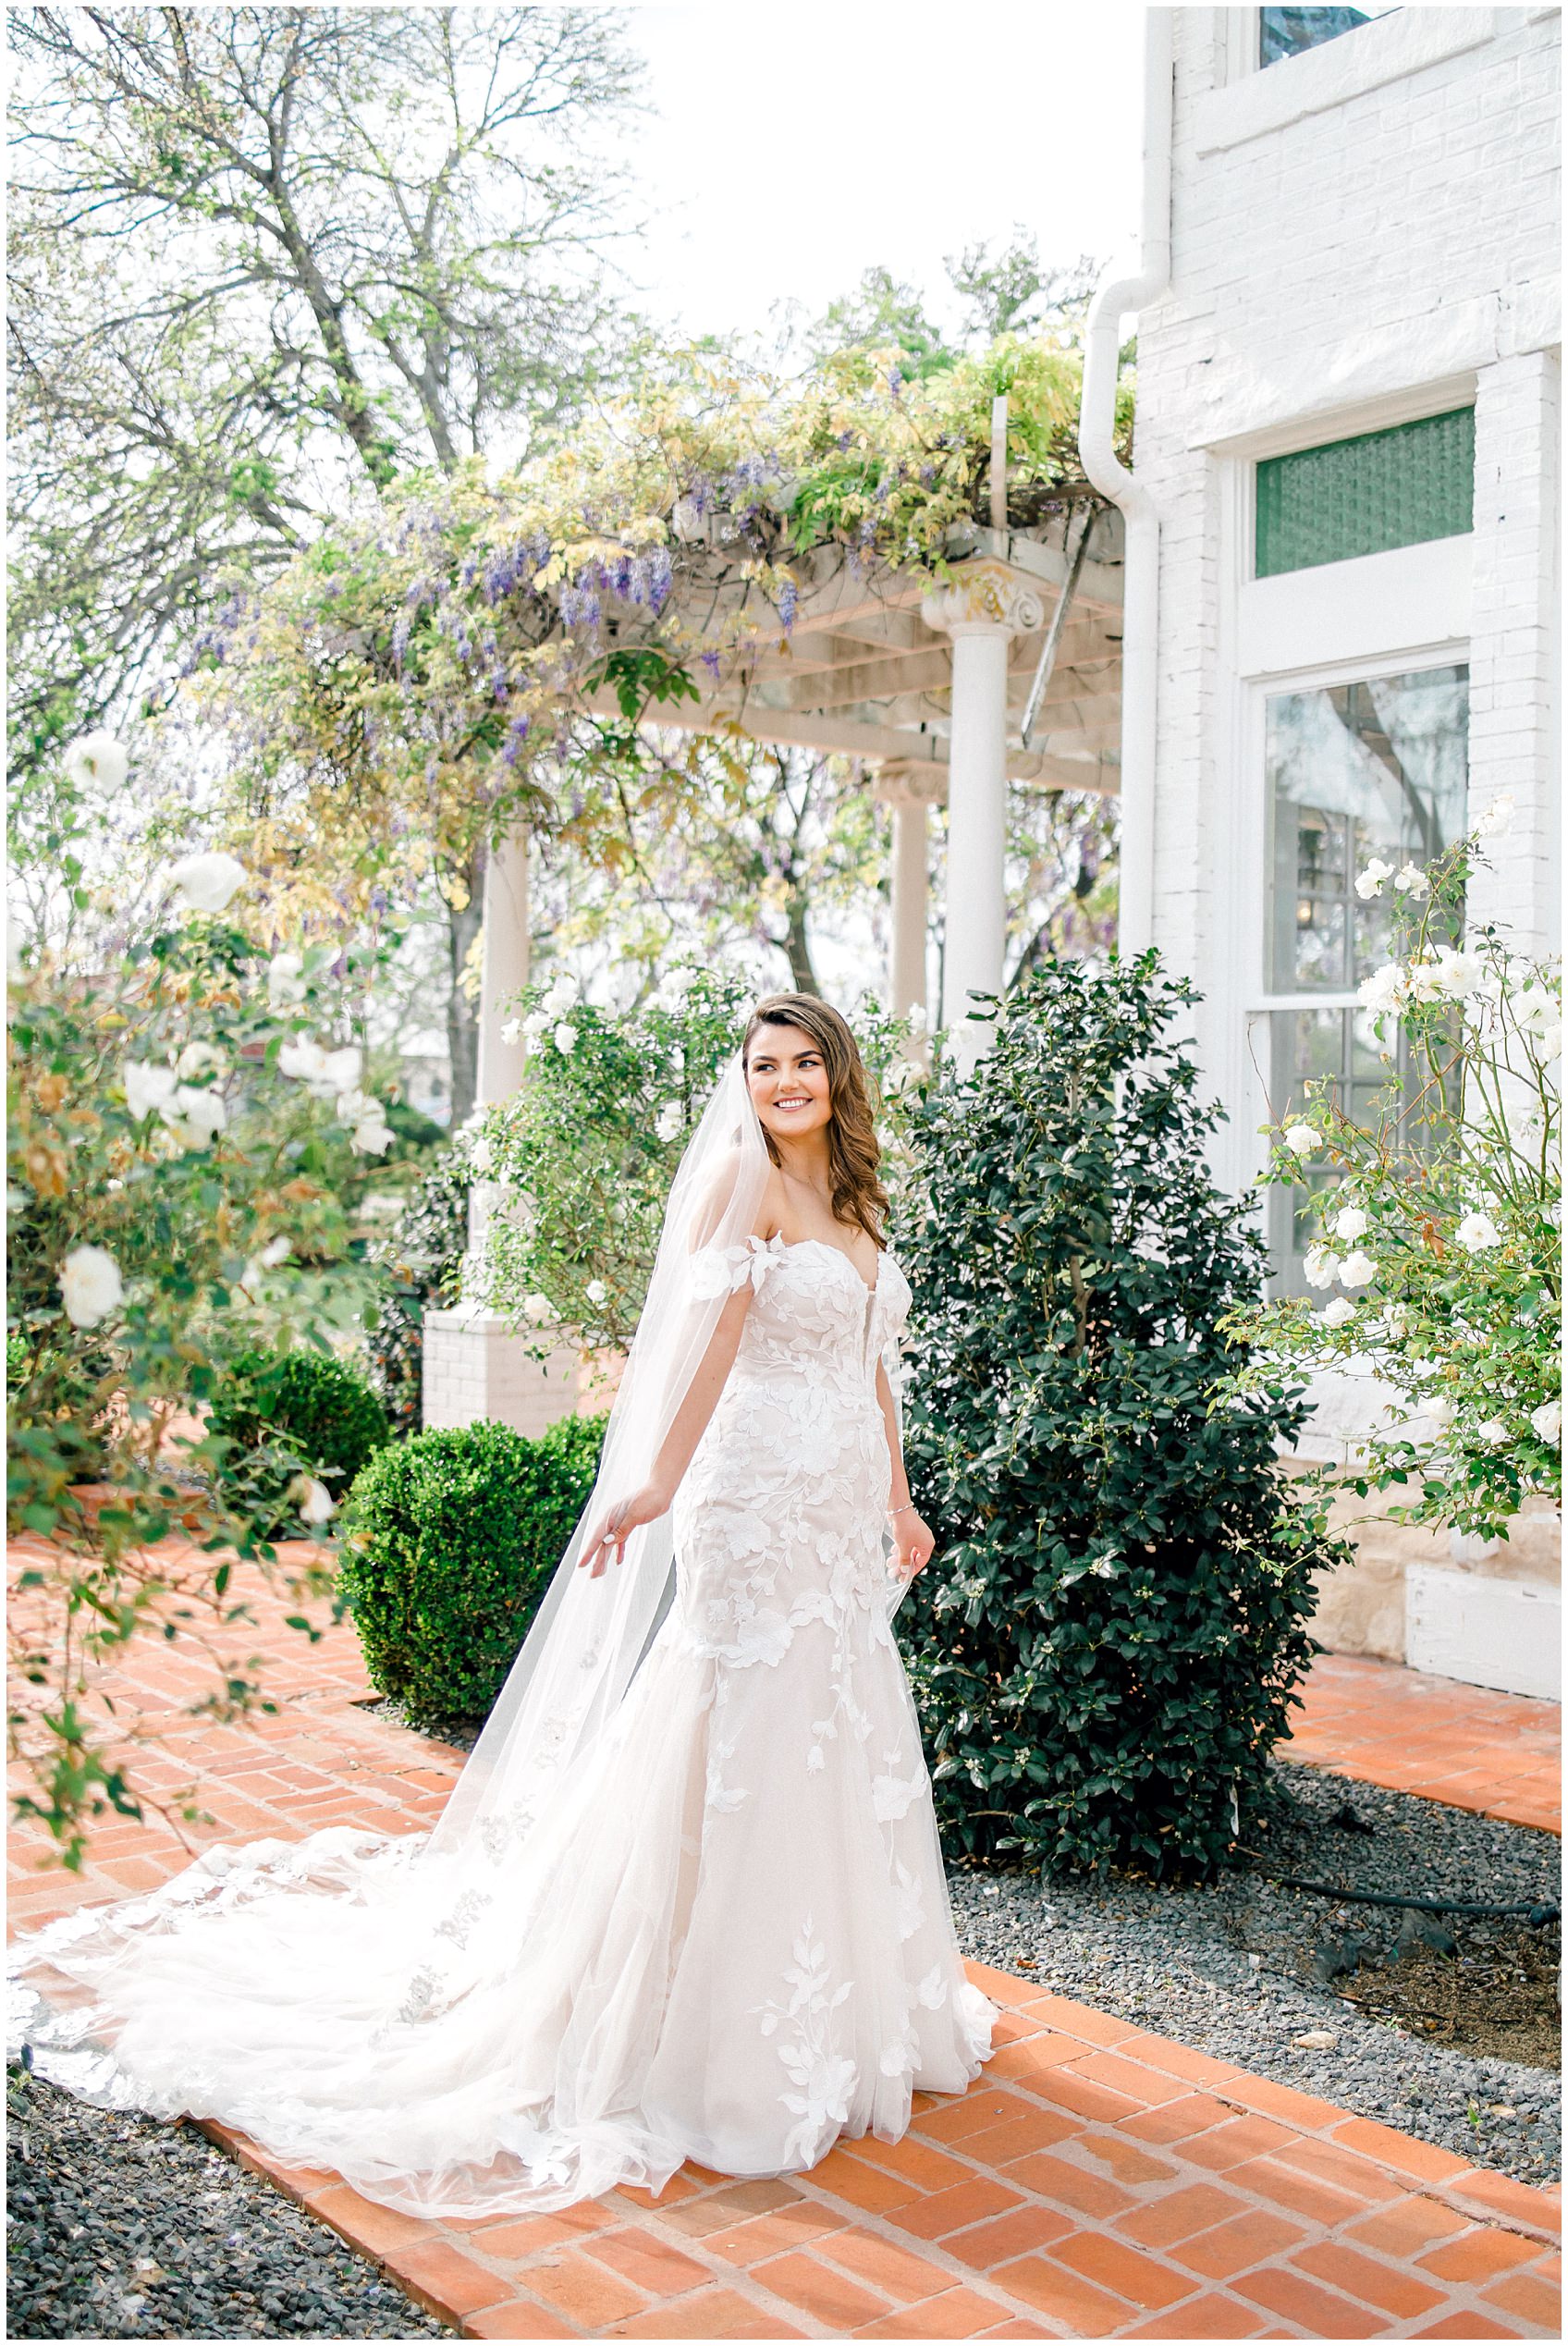 Woodbine Mansion Spring Bridal wedding Photos by Allison Jeffers Photography 0025